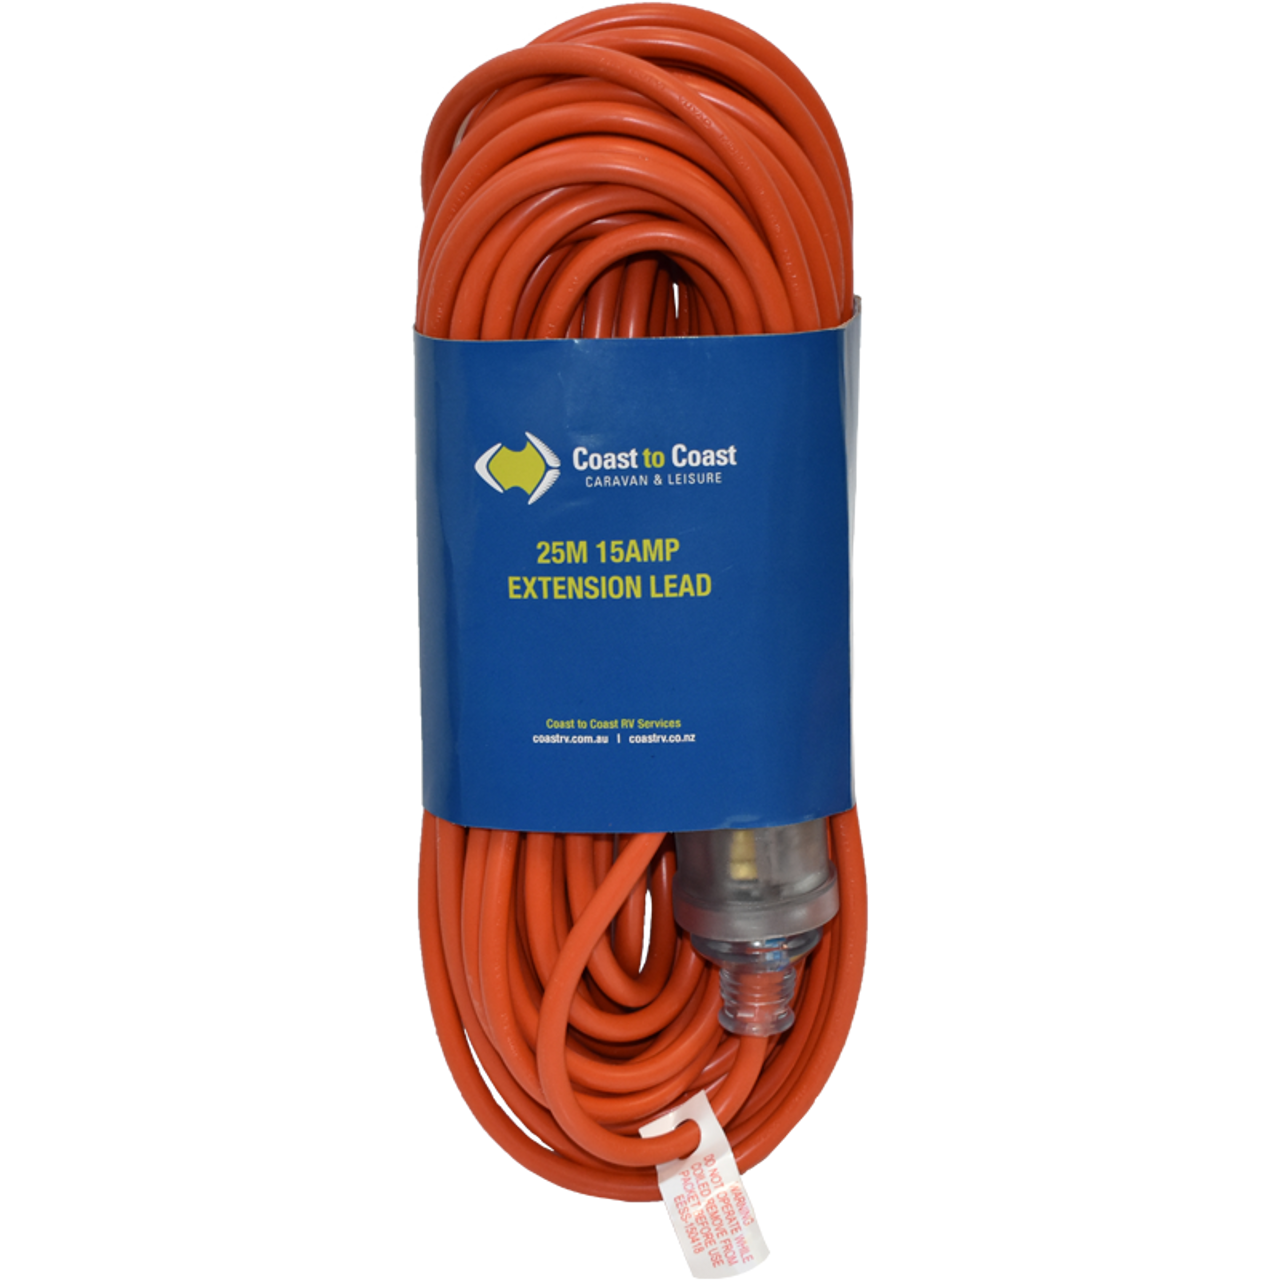 Coast 8M/15Amp Heavy Duty 240V Extension Lead - Led Equipped. Md-15+Md-15Z/8 | 500-03549